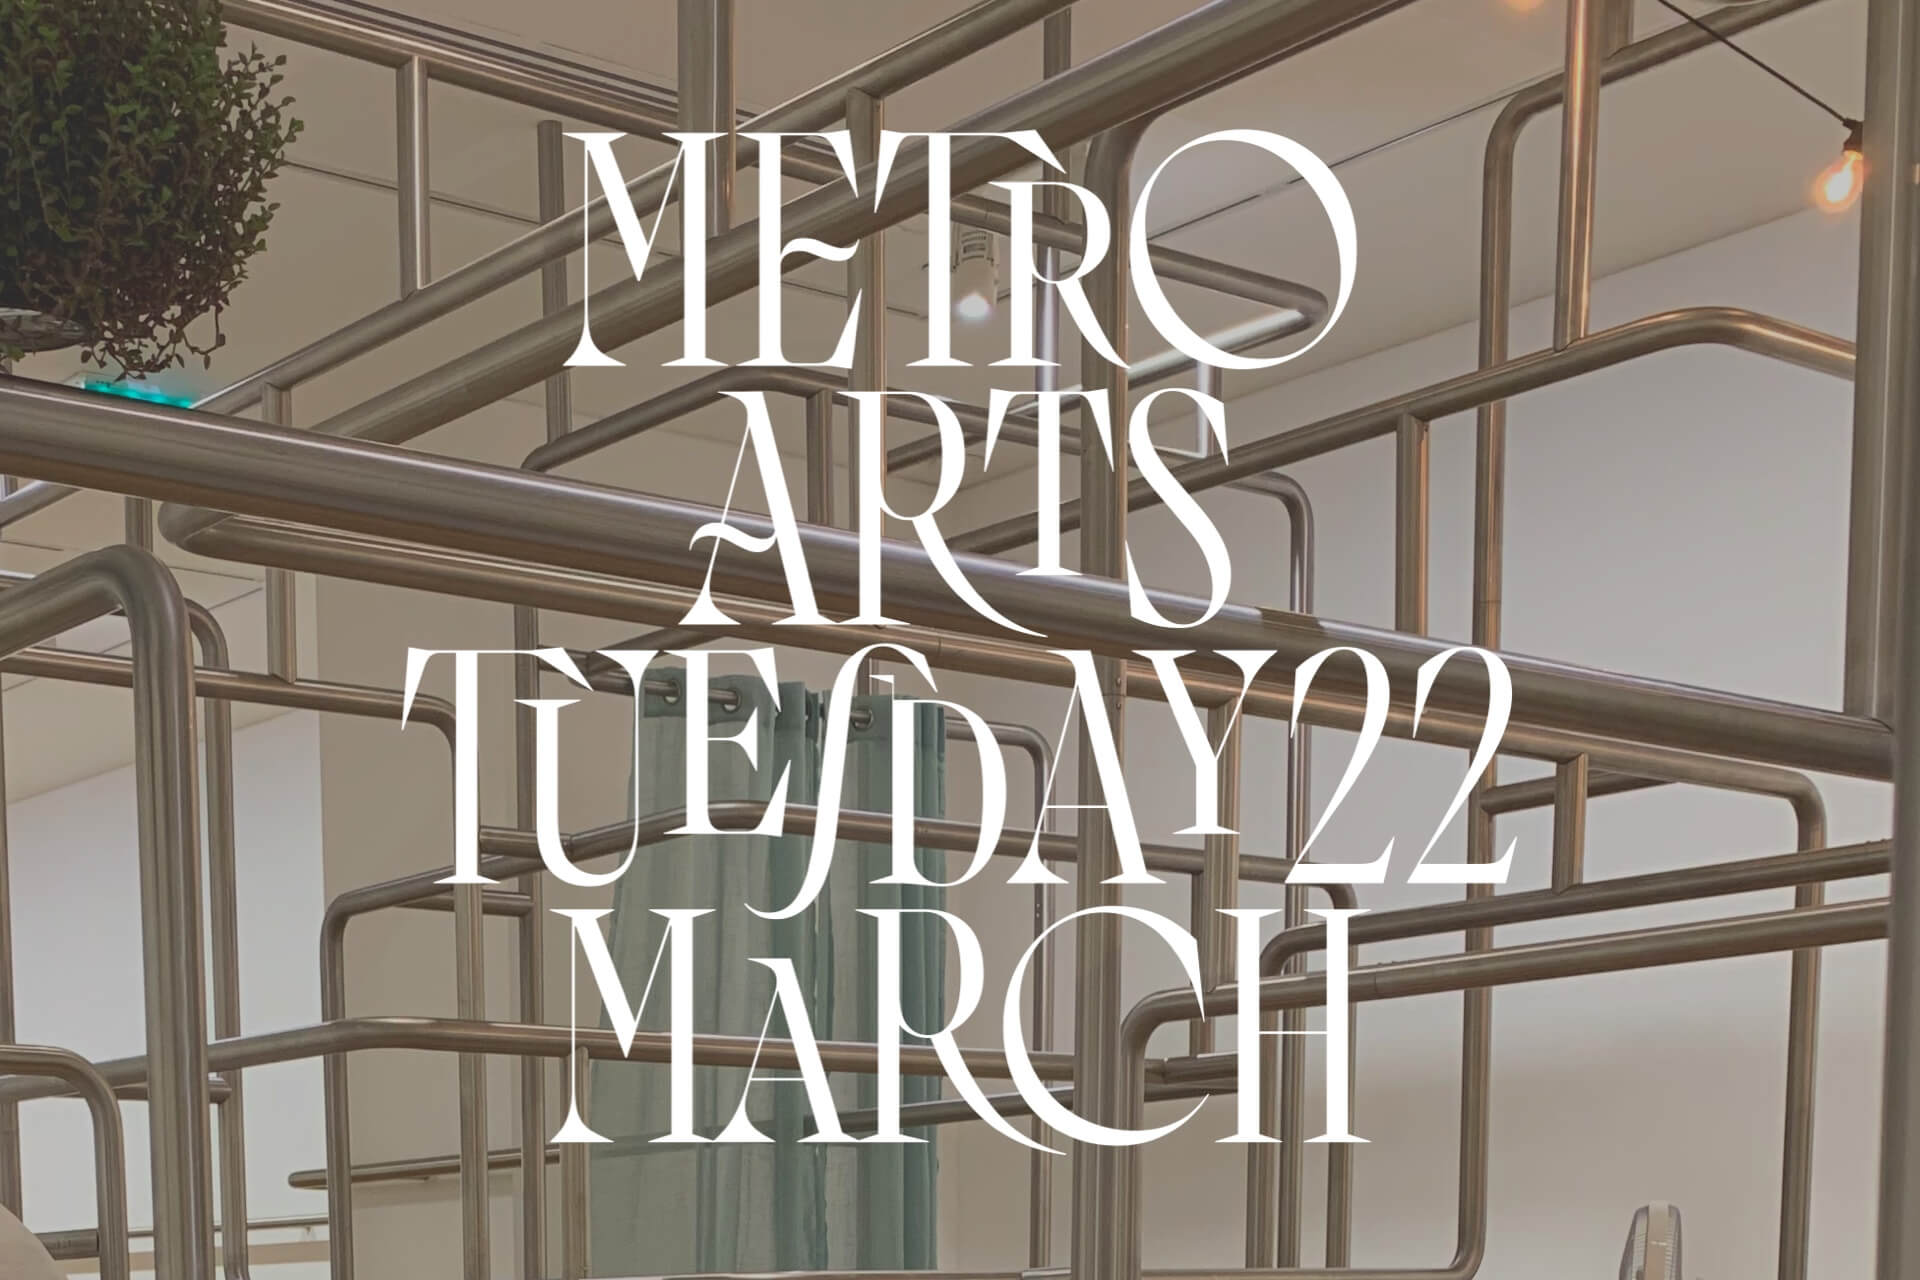 Metro Arts — Tuesday 22 March